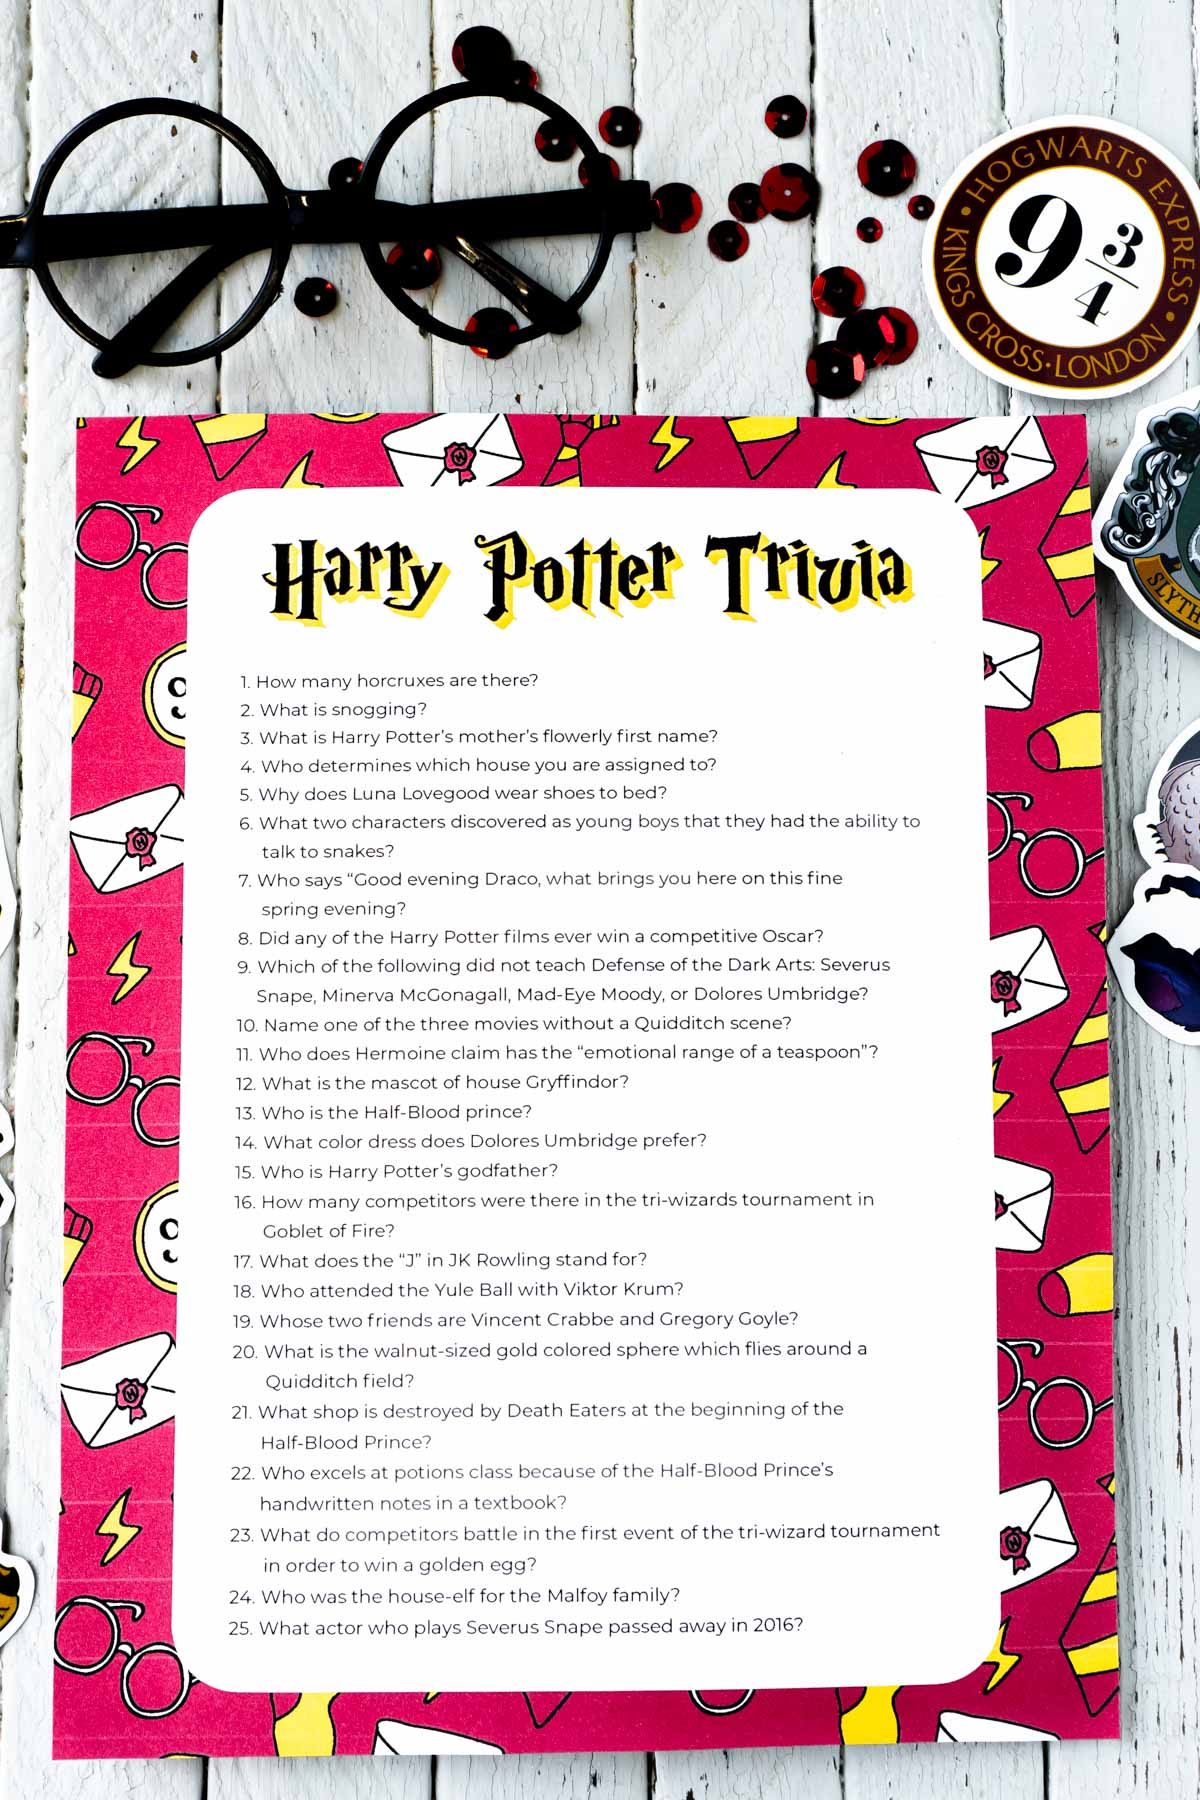 Harry Potter trivia questions with a pair of Harry Potter glasses in the background